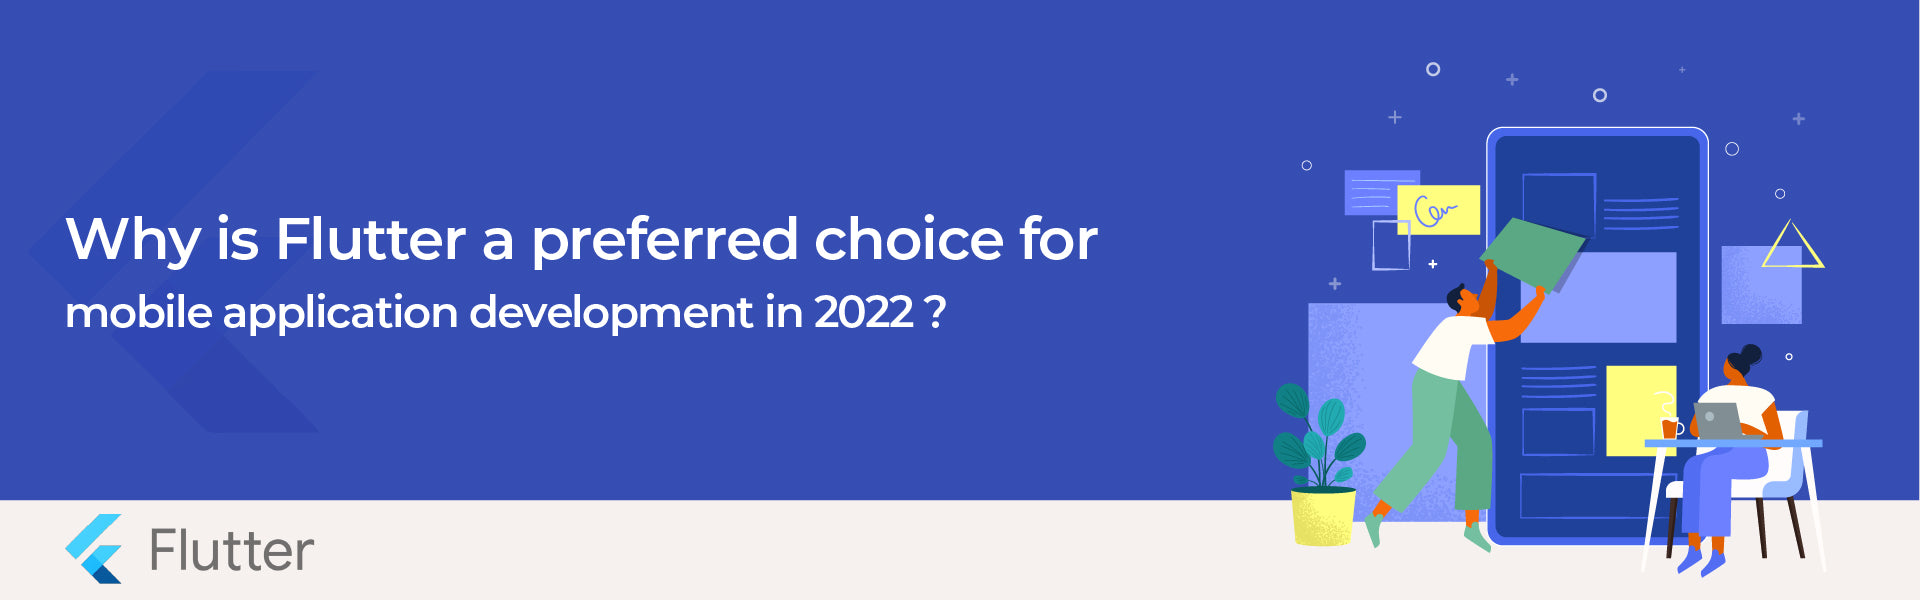 Why is Flutter a preferred choice for mobile application development in 2022?